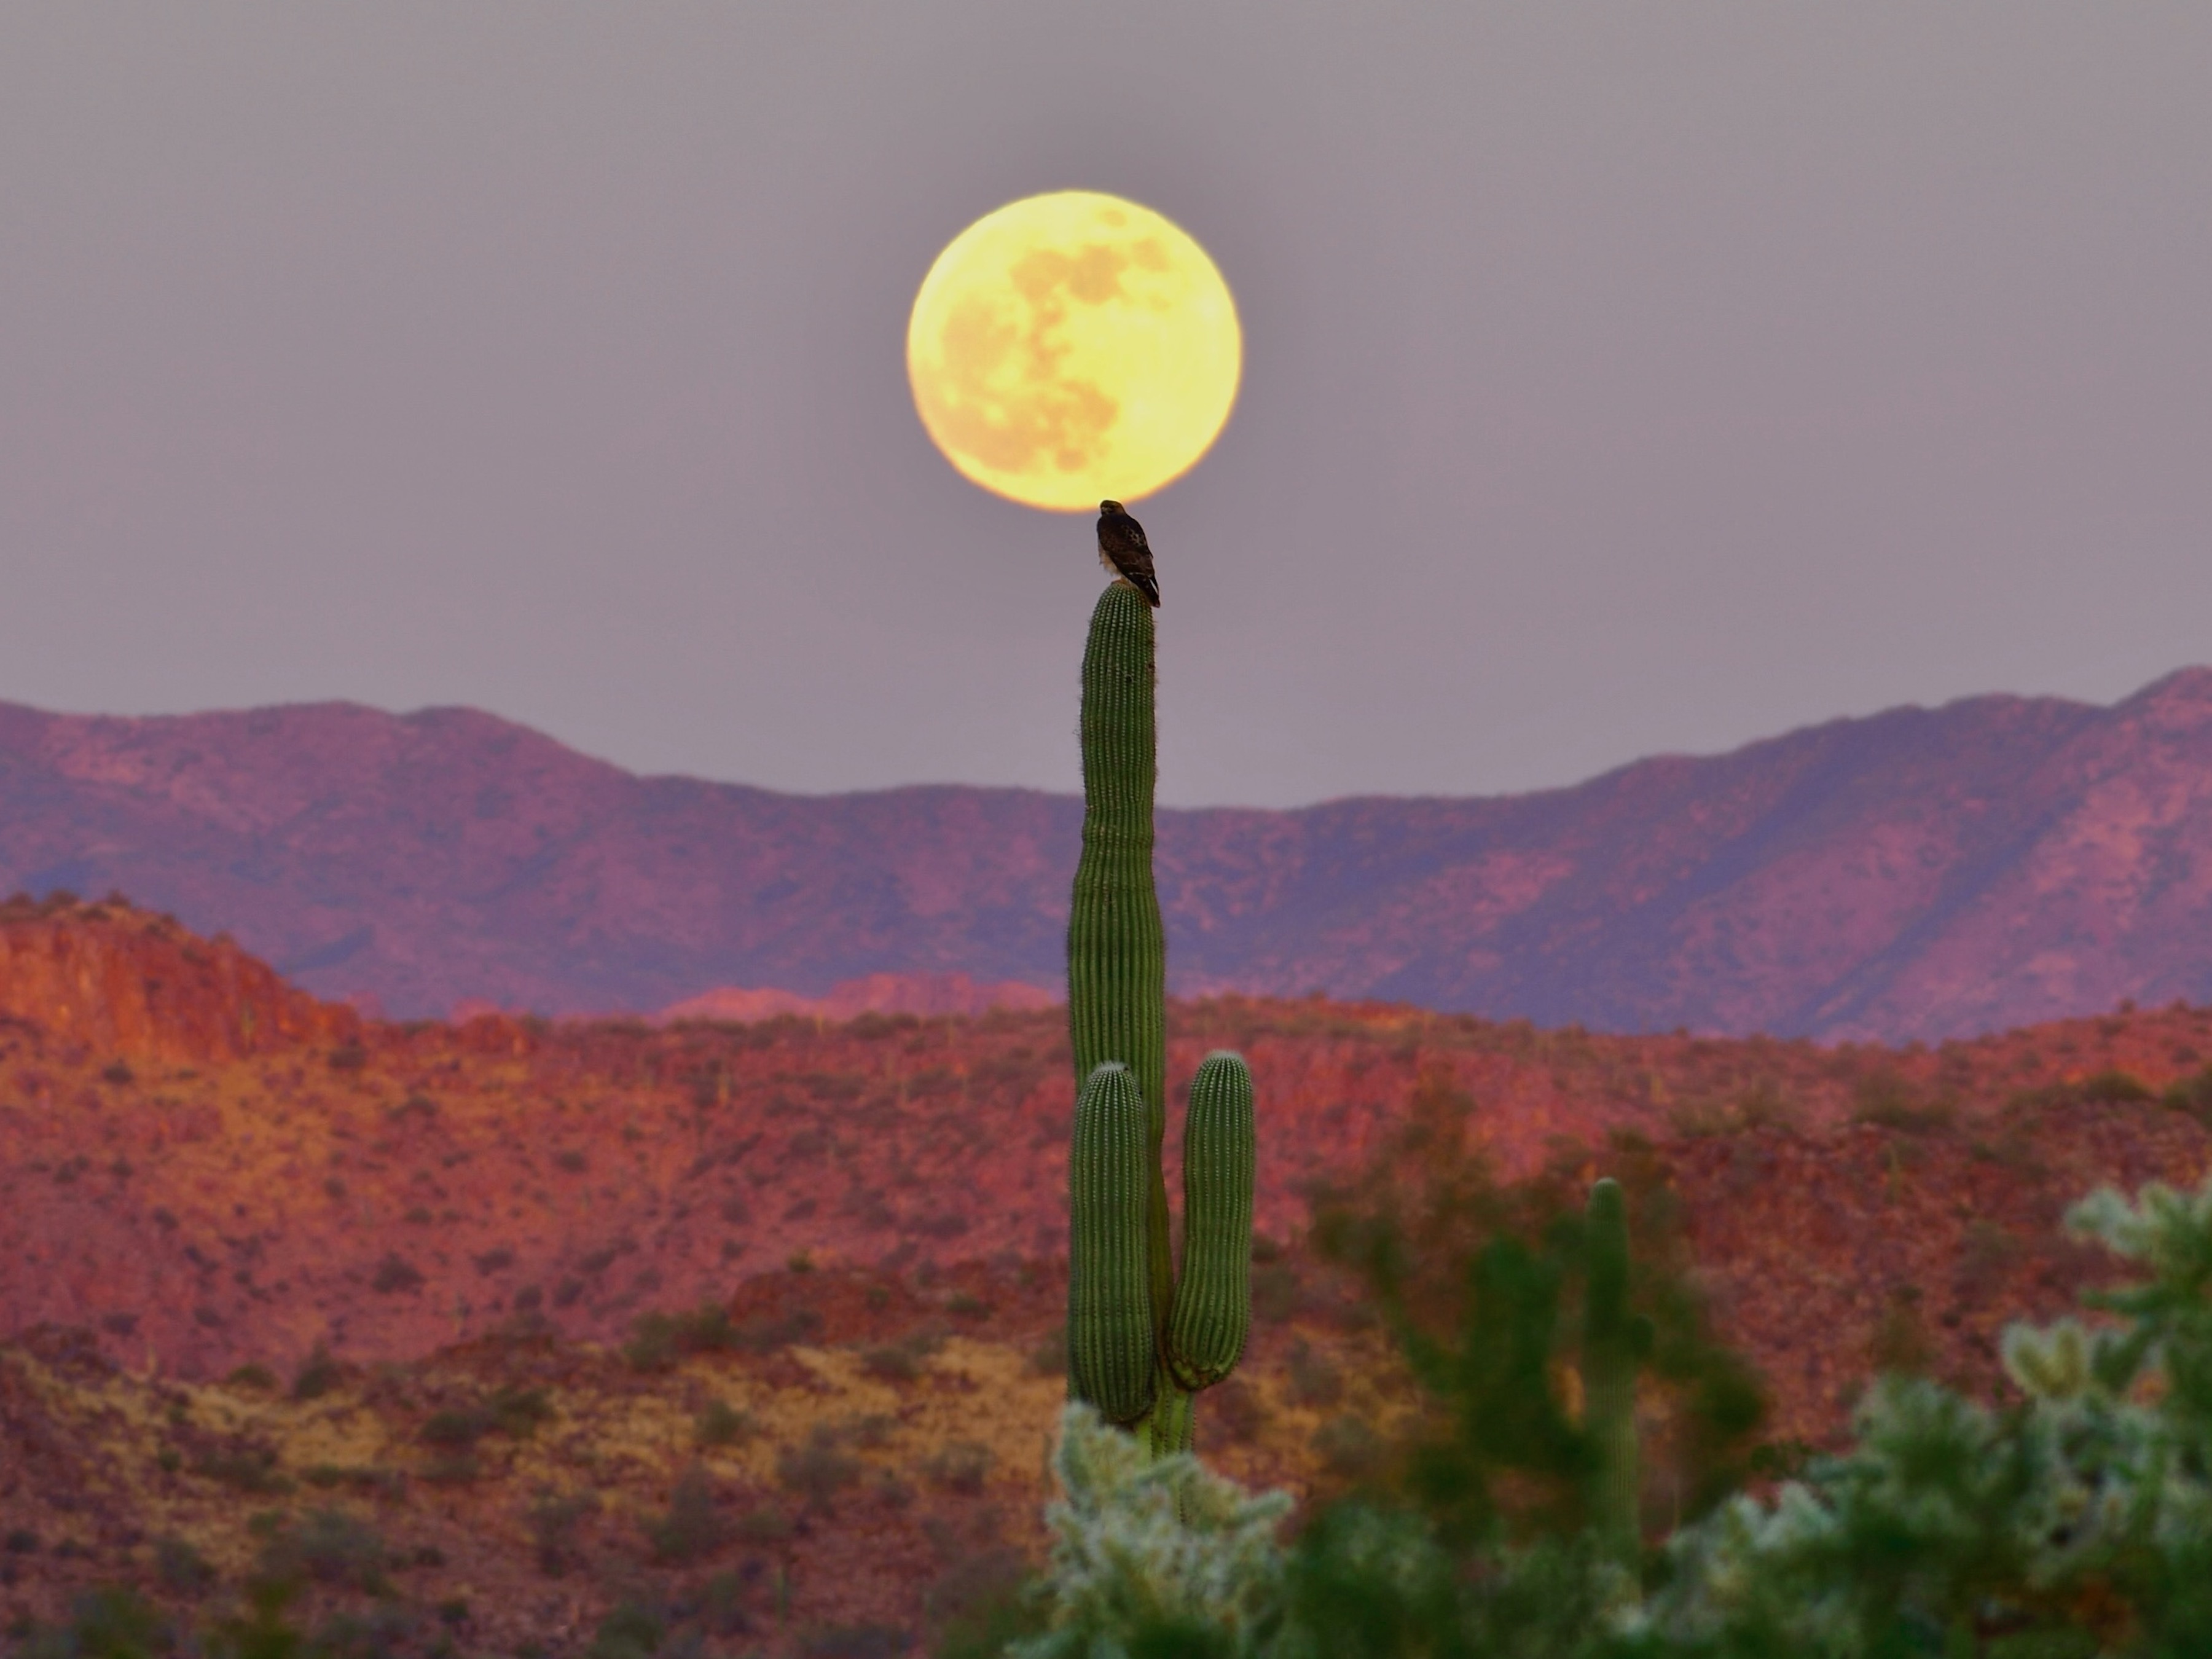 Photo by Robert Oldt  |  The winter solstice moon rises over the Superstition Wilderness, witnessed by a red-tailed hawk perched on its giant saguaro. 